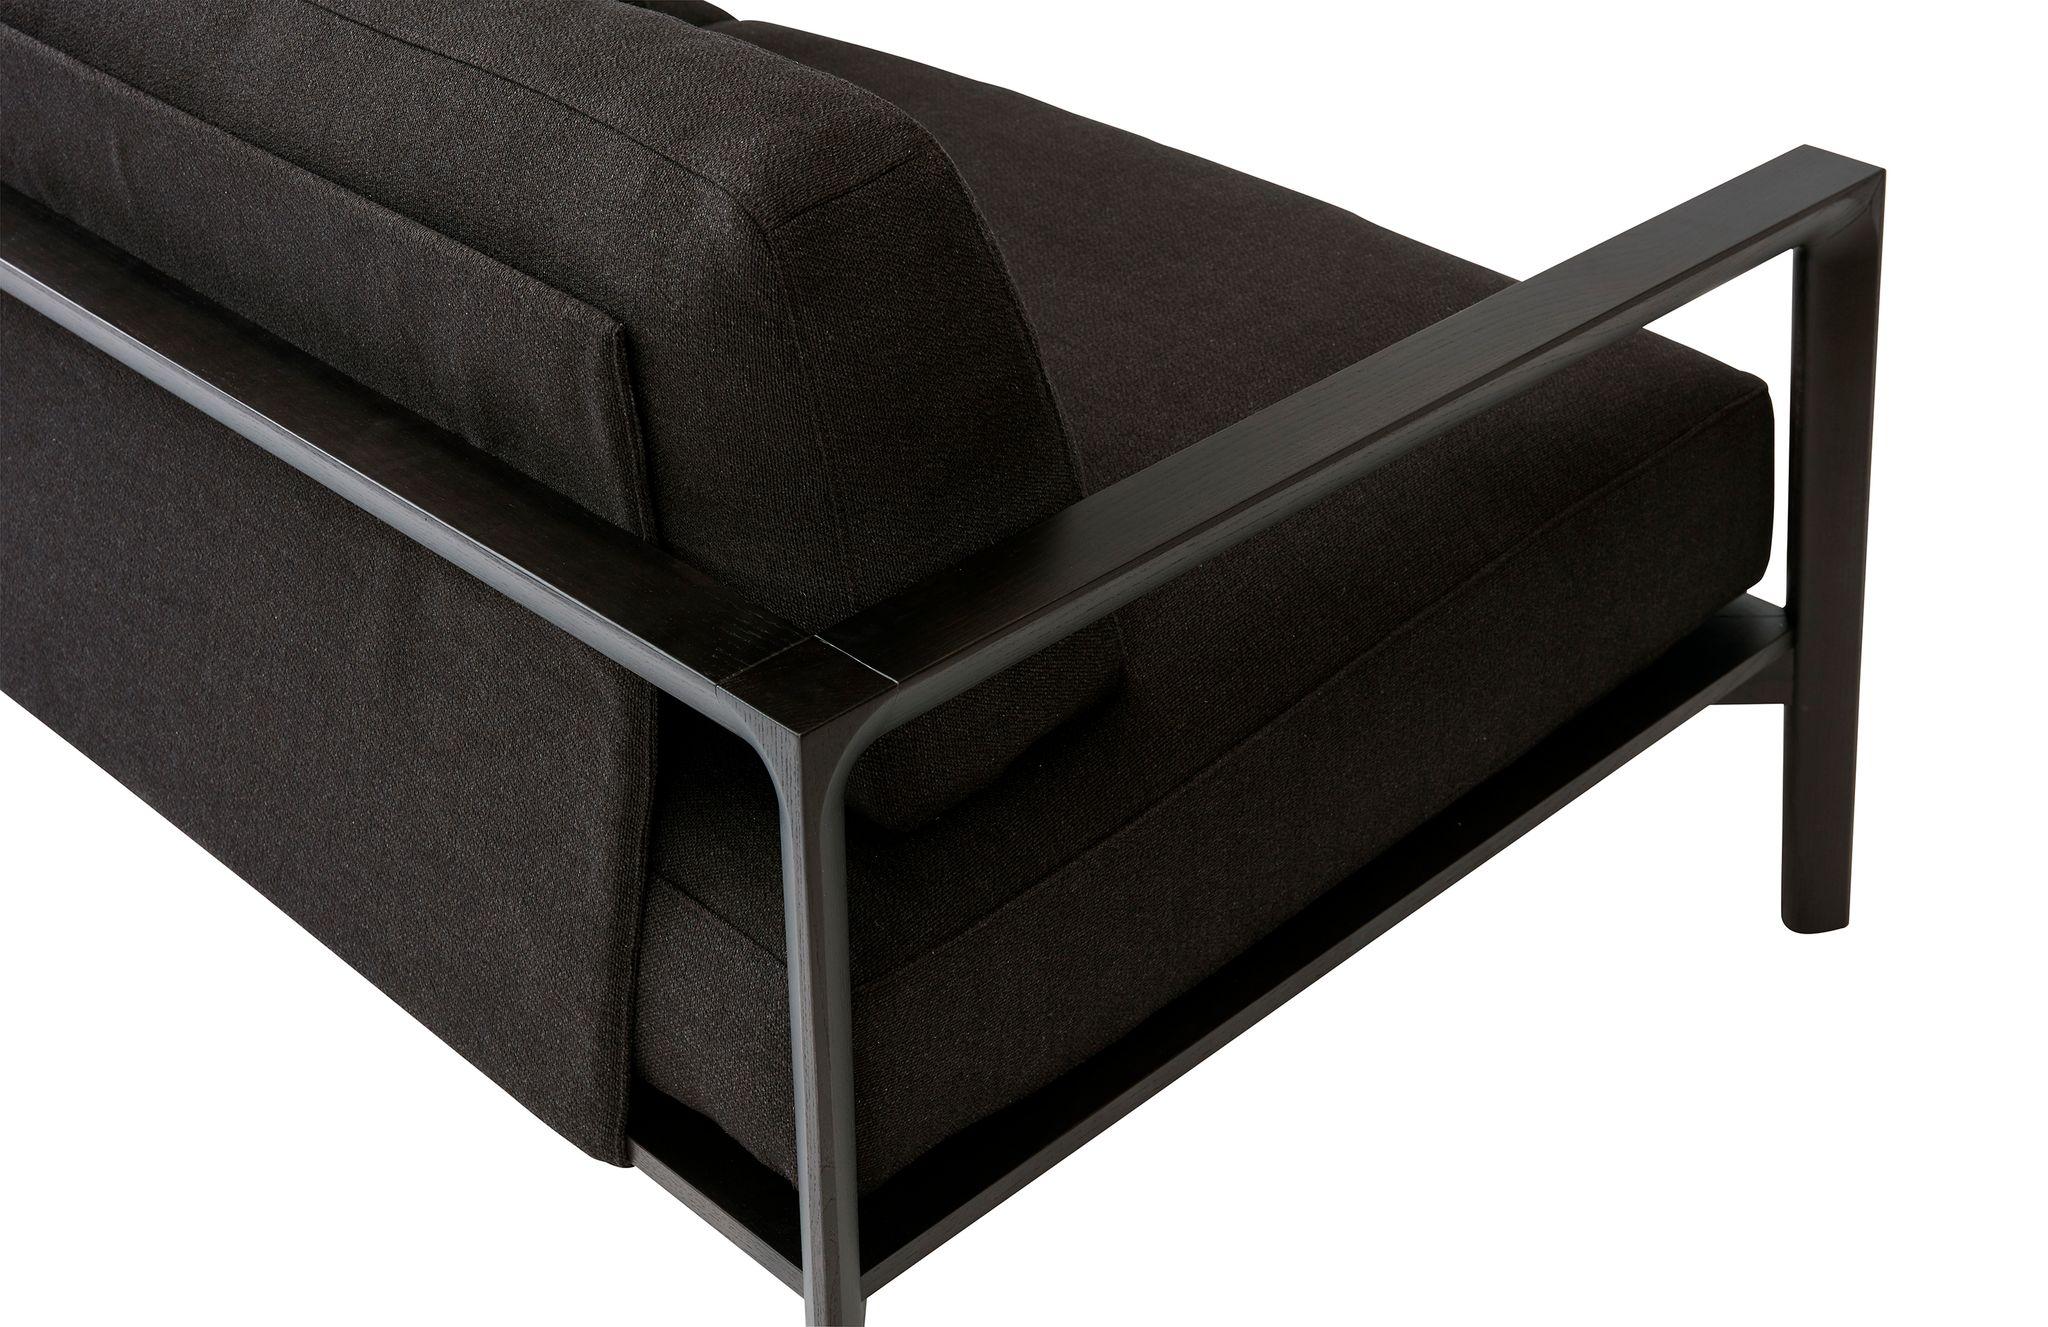 SP01 Ling Sofa -Timber Frame, Upholstered Black Lisbon Leather, Made in Italy In New Condition For Sale In Sydney, NSW